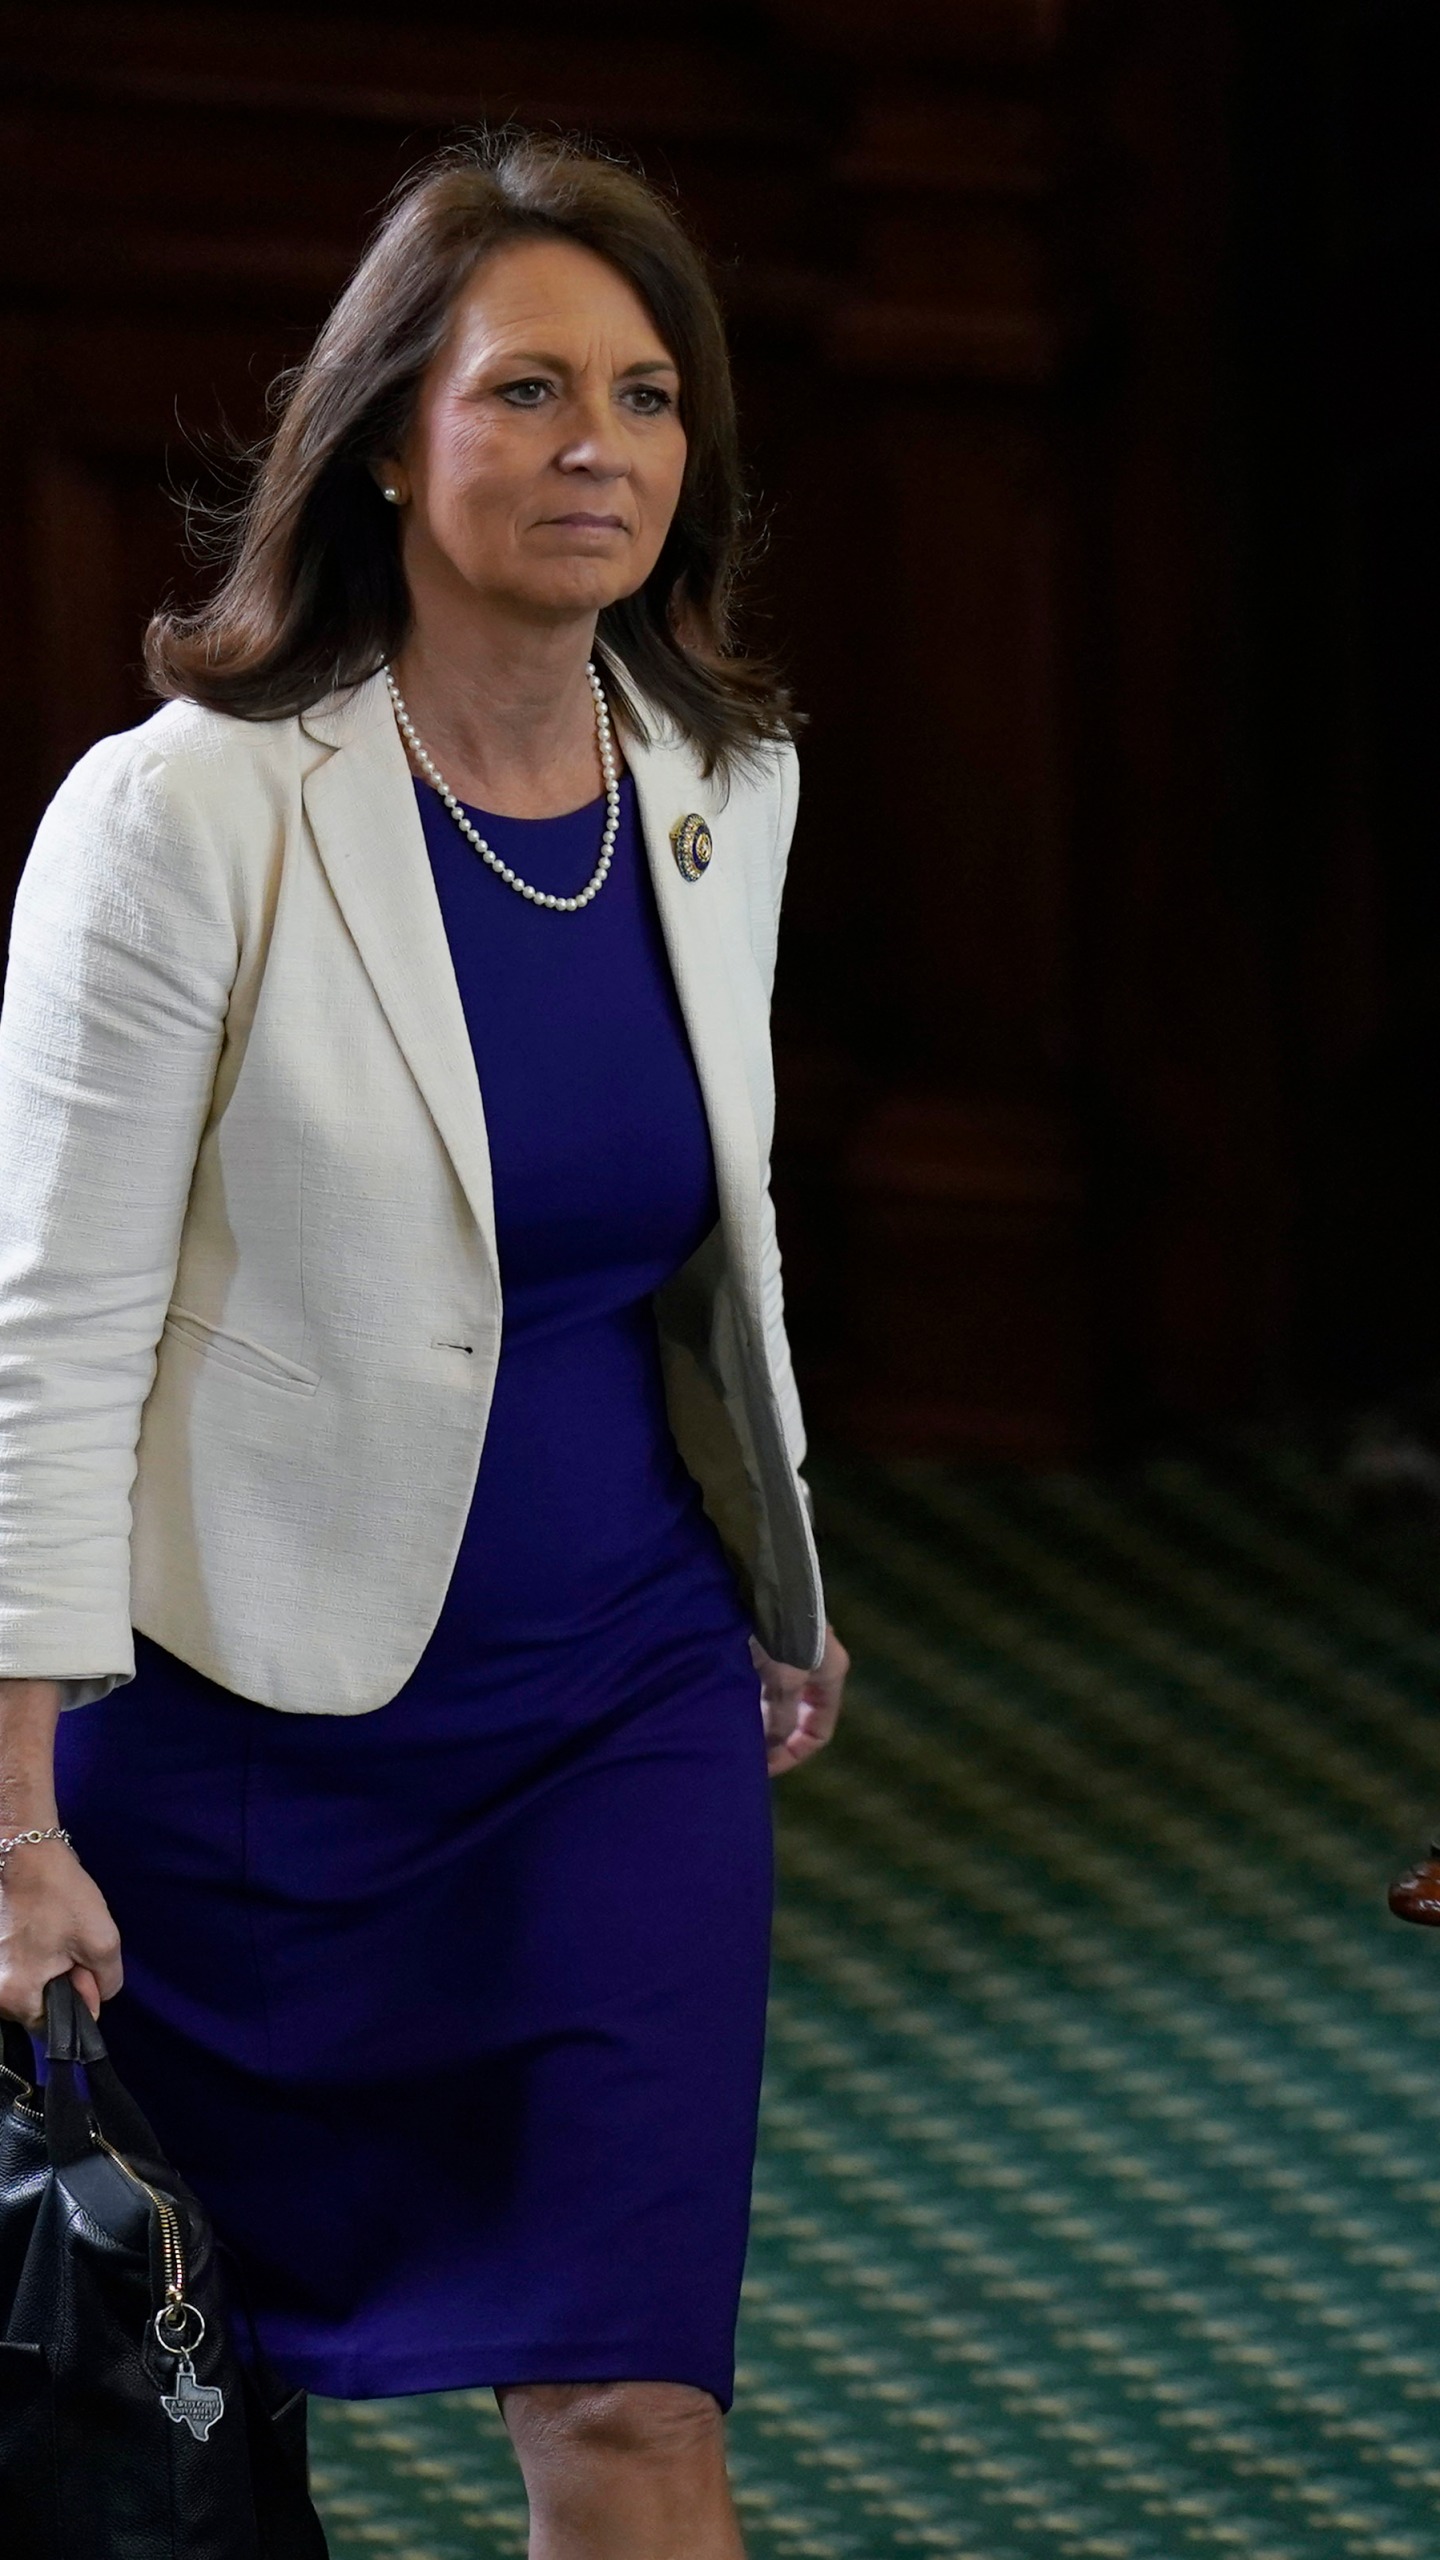 Texas state Sen. Angela Paxton, R-McKinney, wife of impeached state Attorney General Ken Paxton, arrives to the Senate Chamber at the Texas Capitol in Austin, Texas, Monday, May 29, 2023. The historic impeachment of Paxton is plunging Republicans into a bruising fight over whether to banish one of their own in America's biggest red state. (AP Photo/Eric Gay)